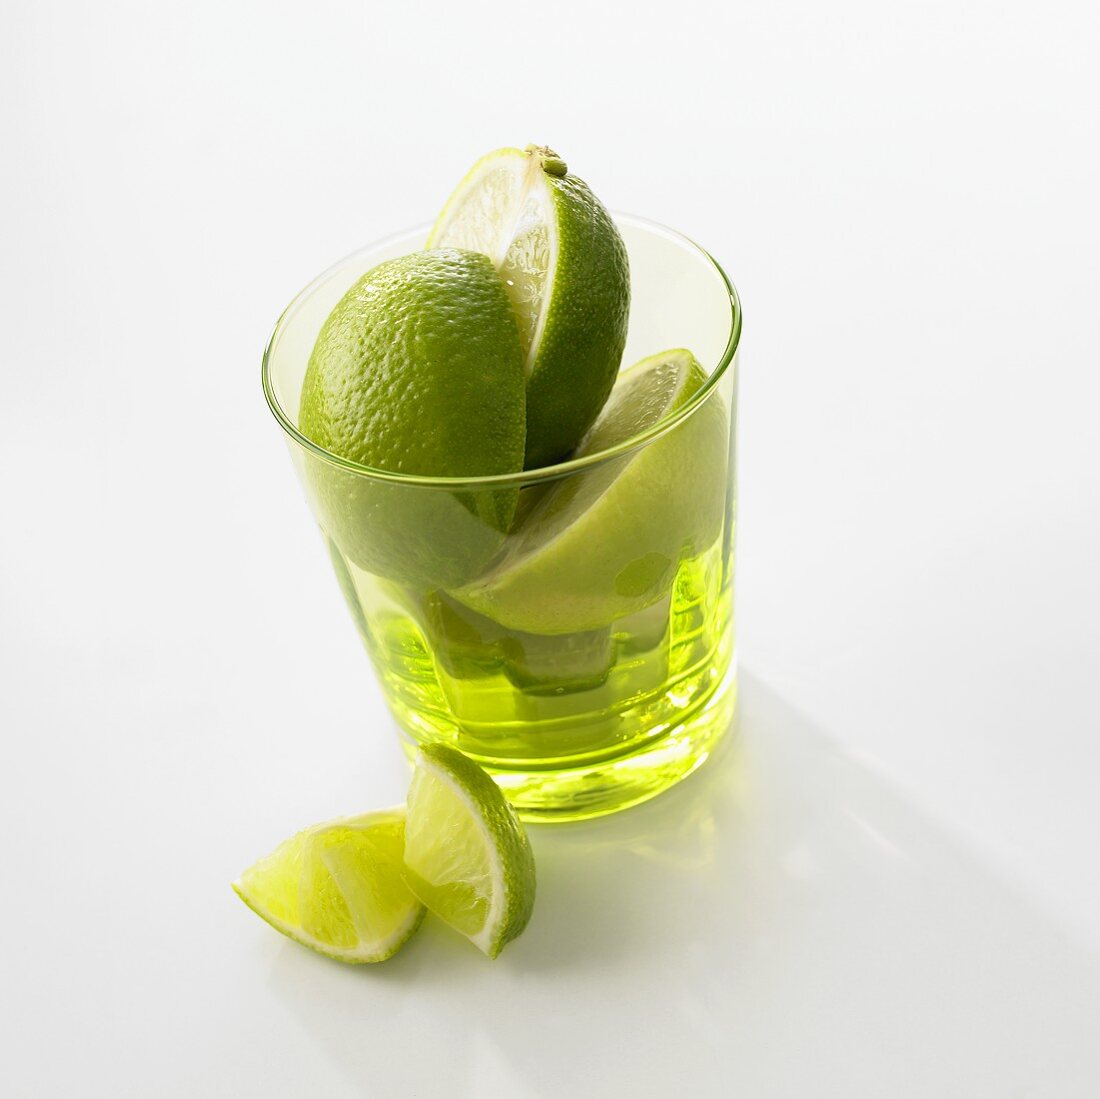 Limes in a glass